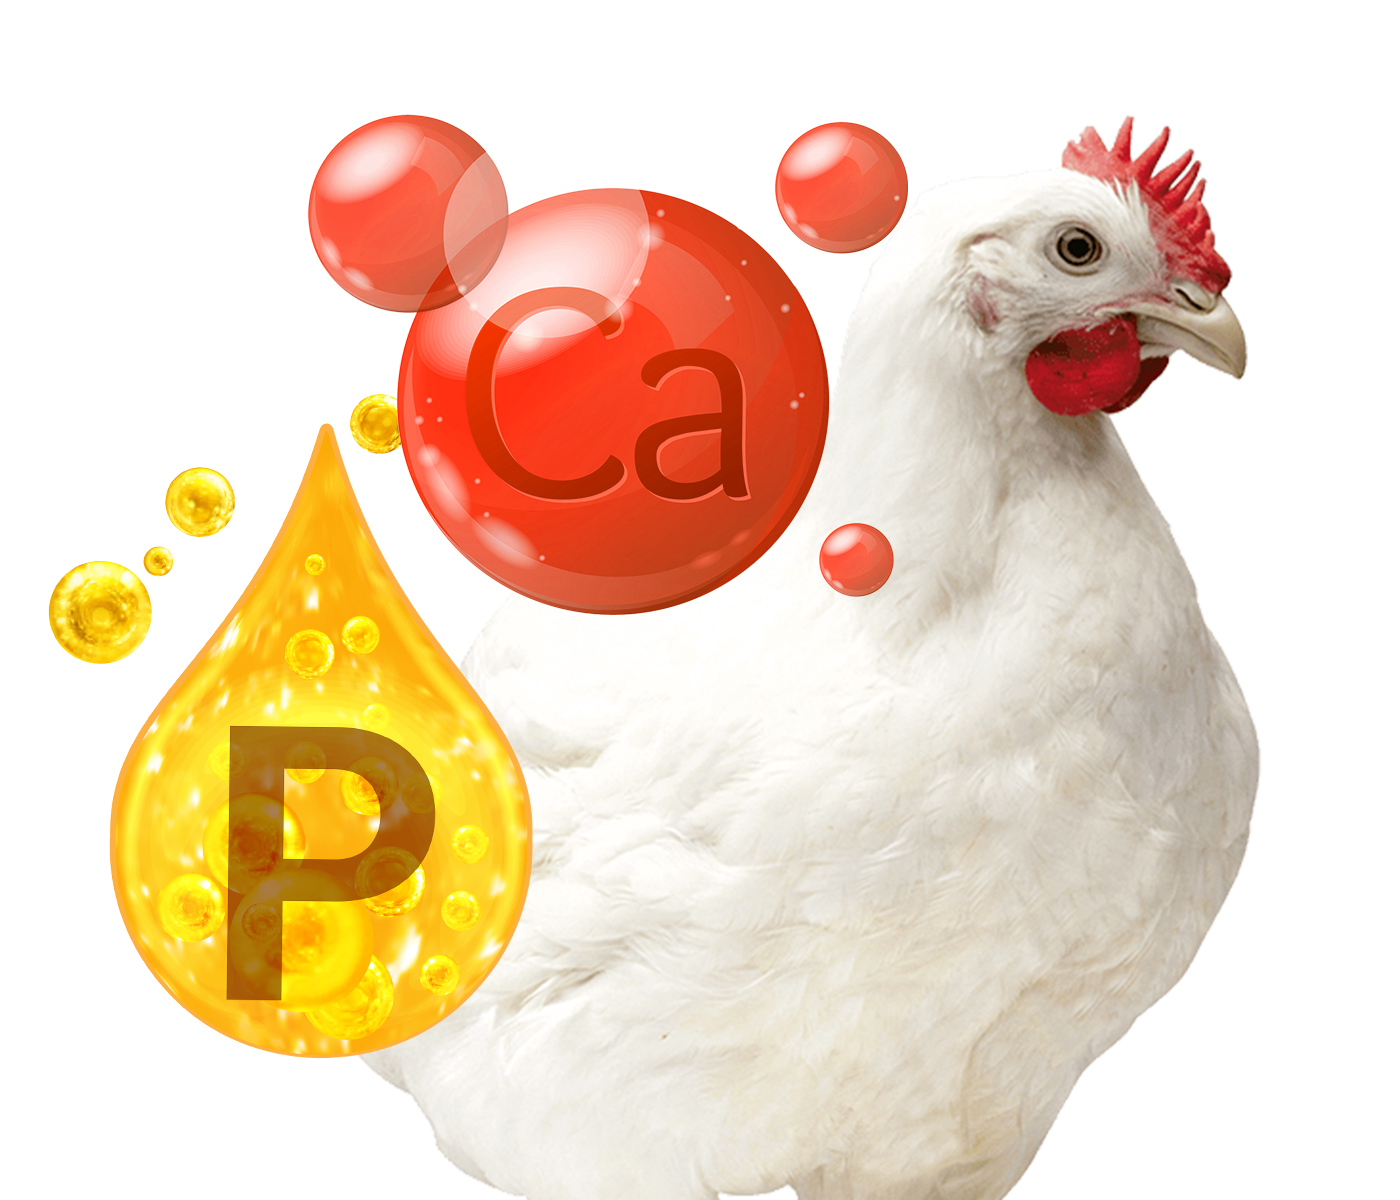 Calcium and Phosphorus. A necessary balance in broiler diets